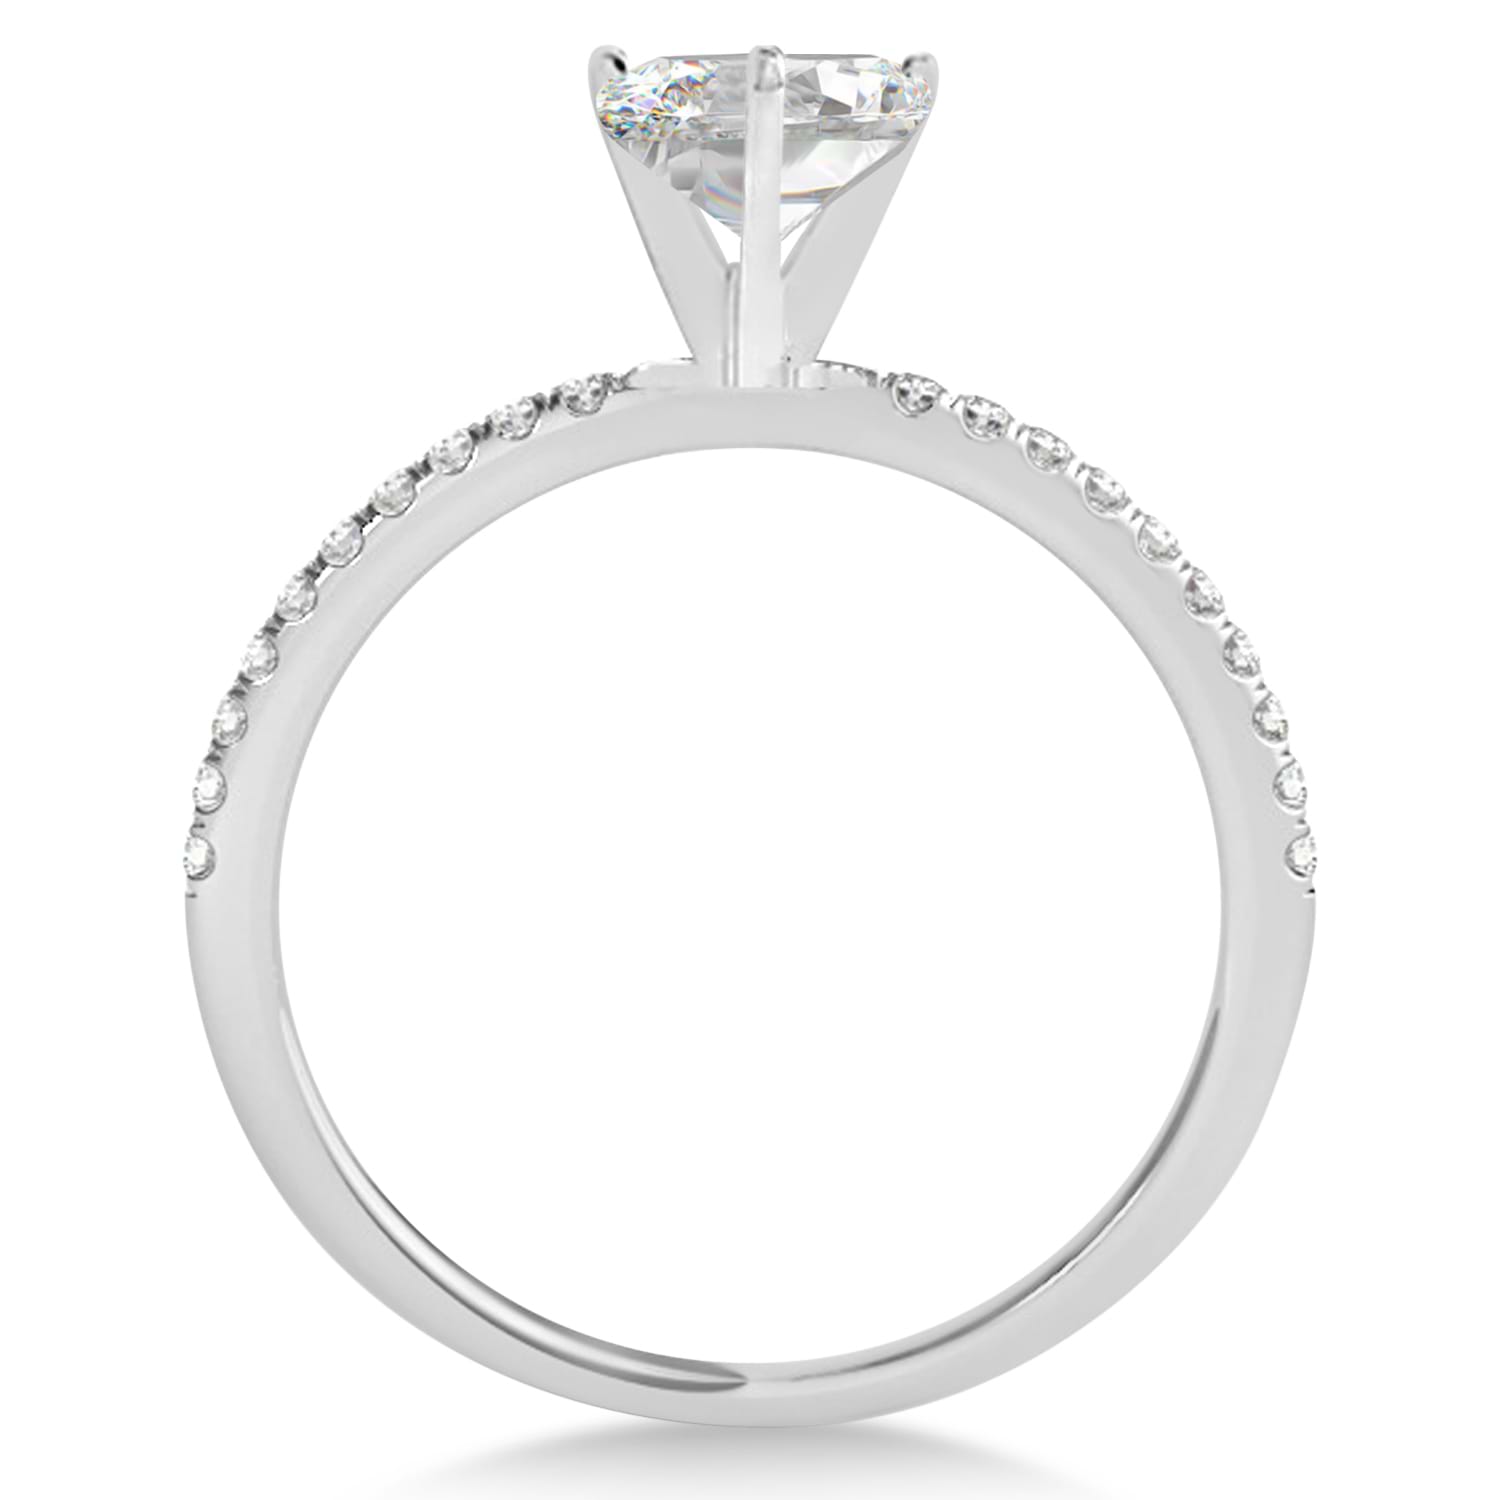 Lab Grown Diamond Accented Oval Shape Engagement Ring 14k White Gold (3.00ct)